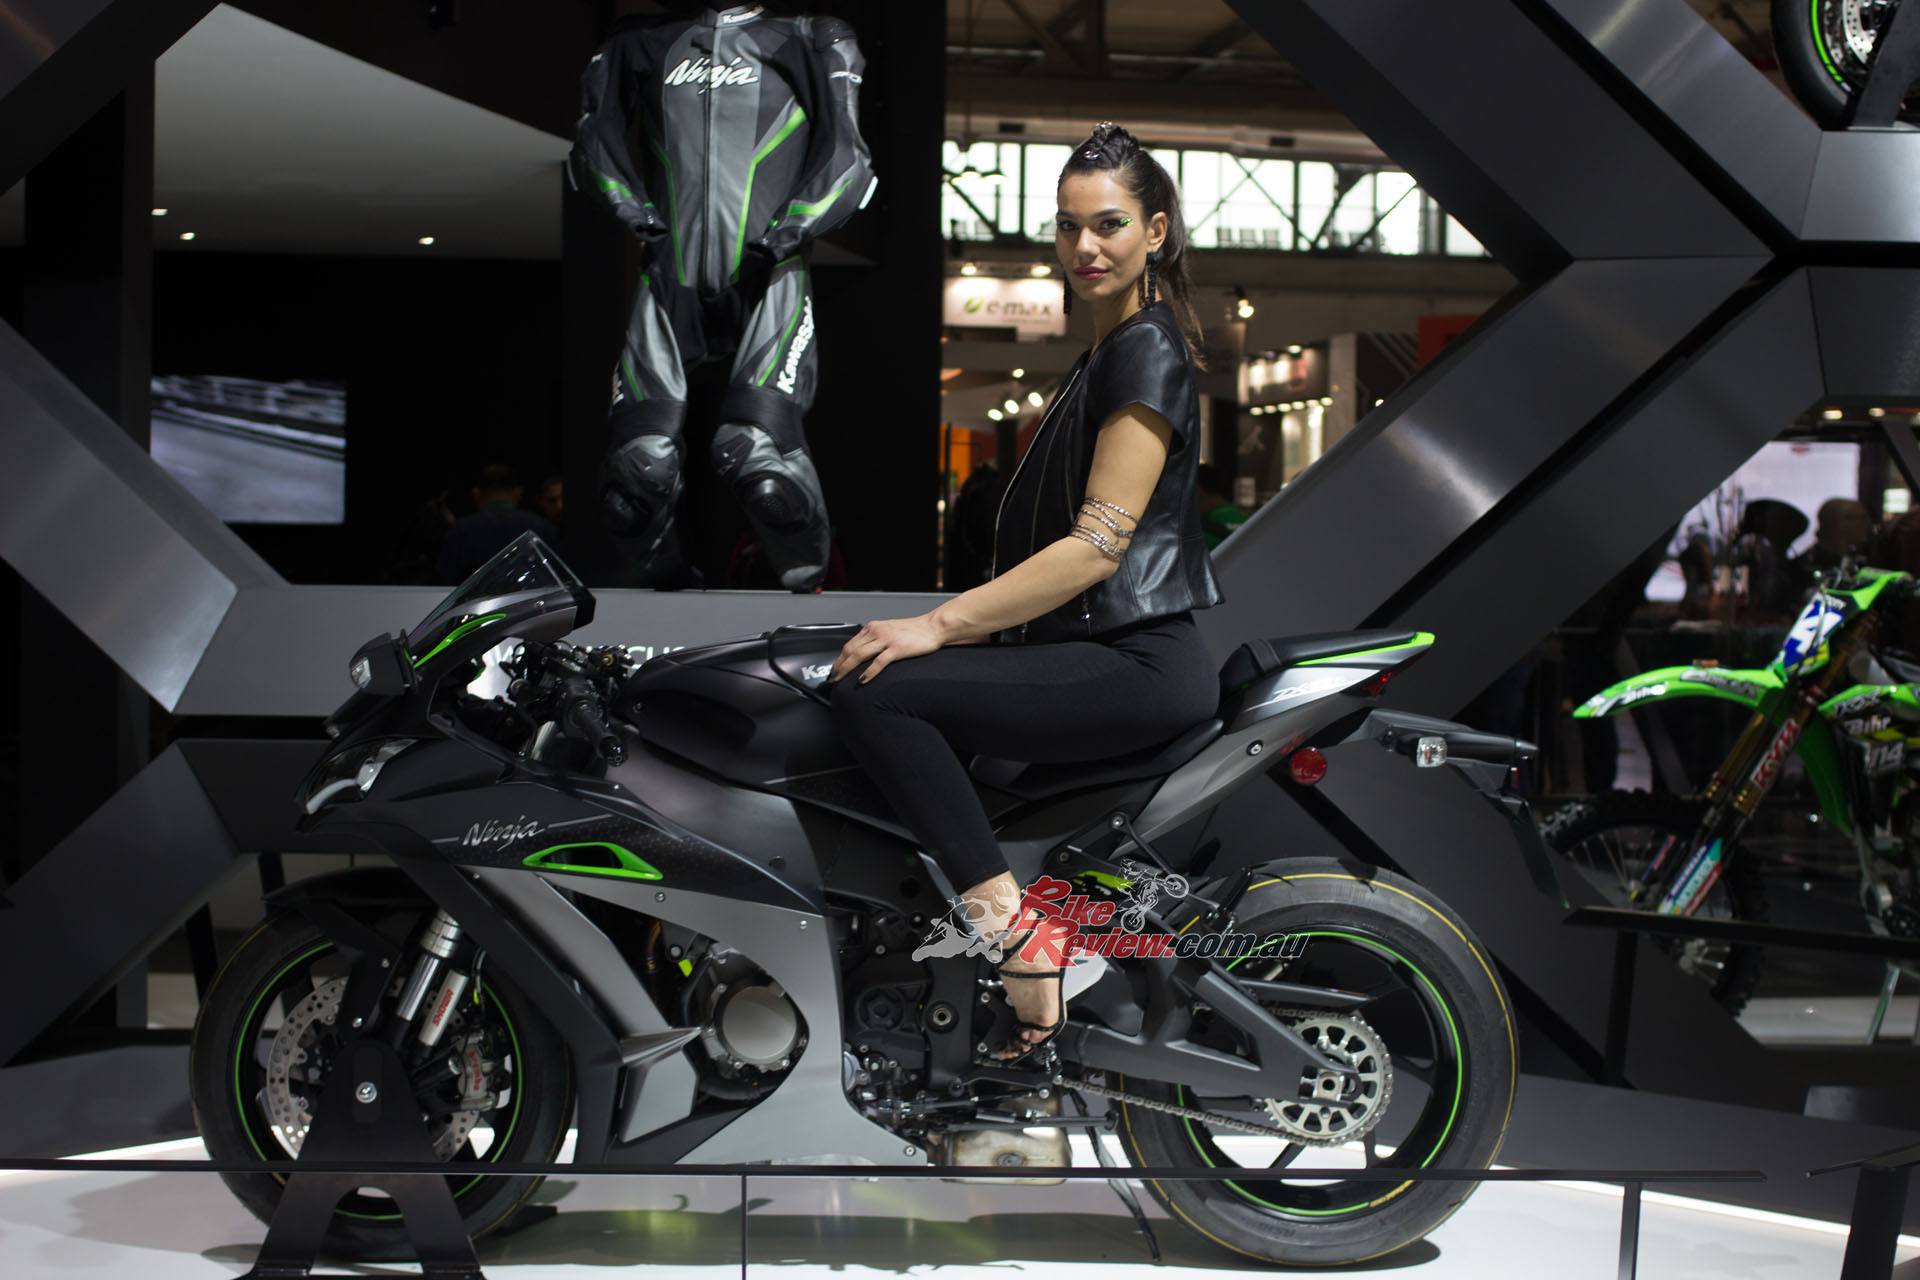 The special edition Ninja ZX-10R SE is also unveiled